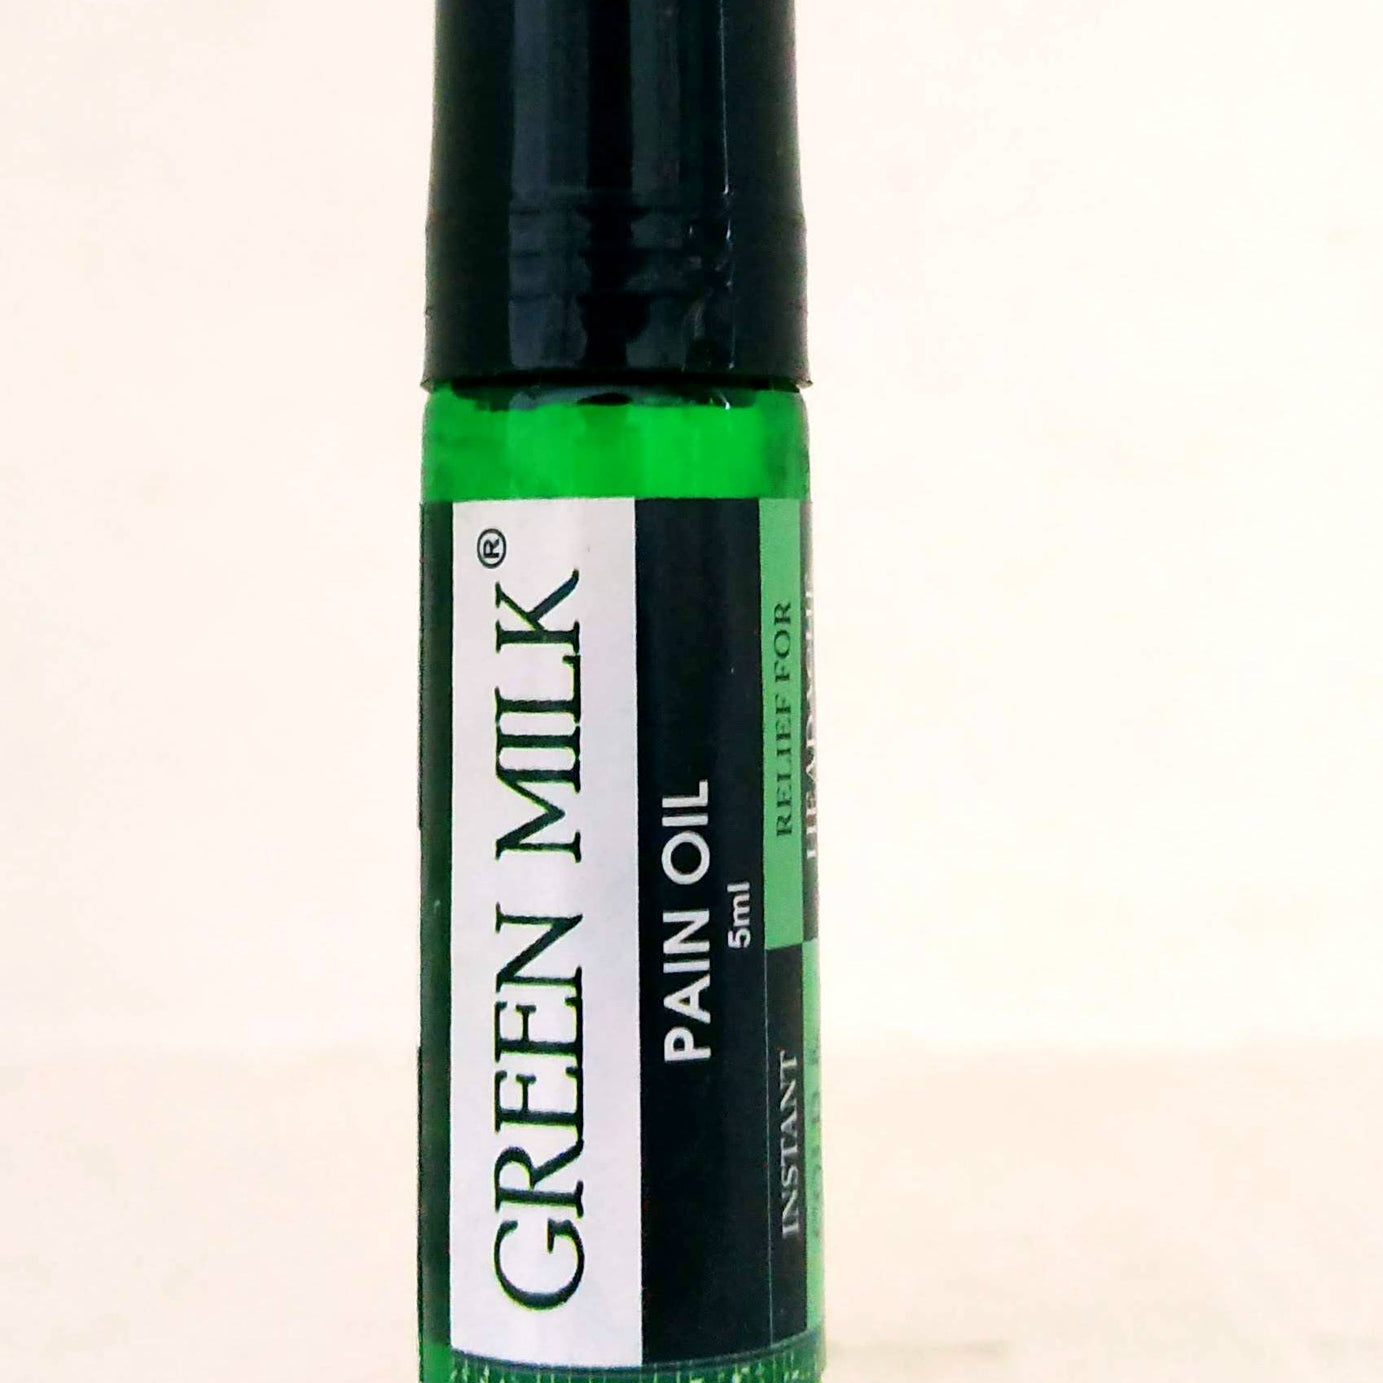 Shop Greenmilk Pain oil 5ml at price 40.00 from Apex Ayurveda Online - Ayush Care